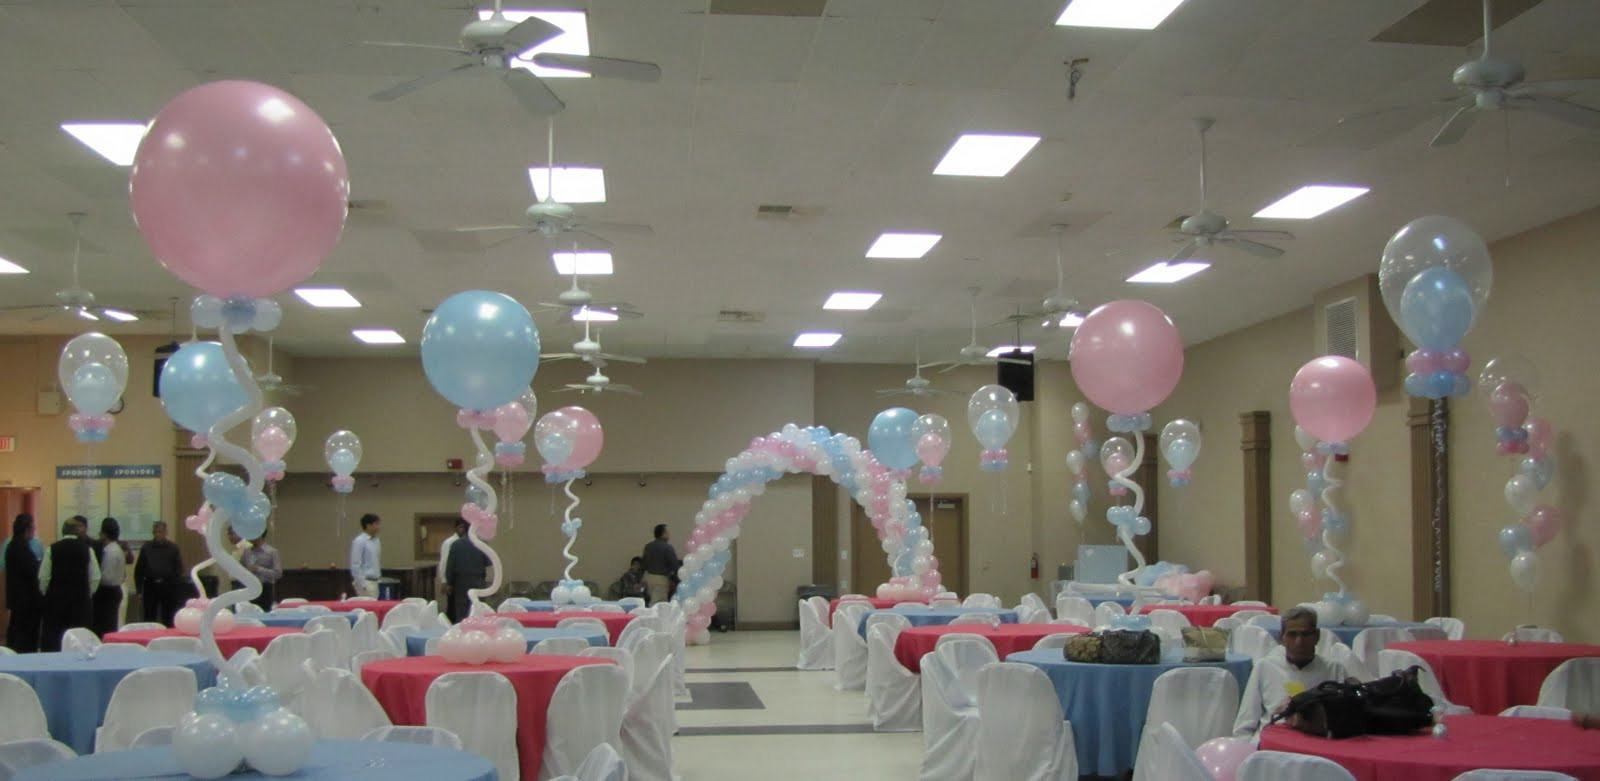 Baby Shower Room Decorations
 Party People Event Decorating pany Baby Shower Ocala FL